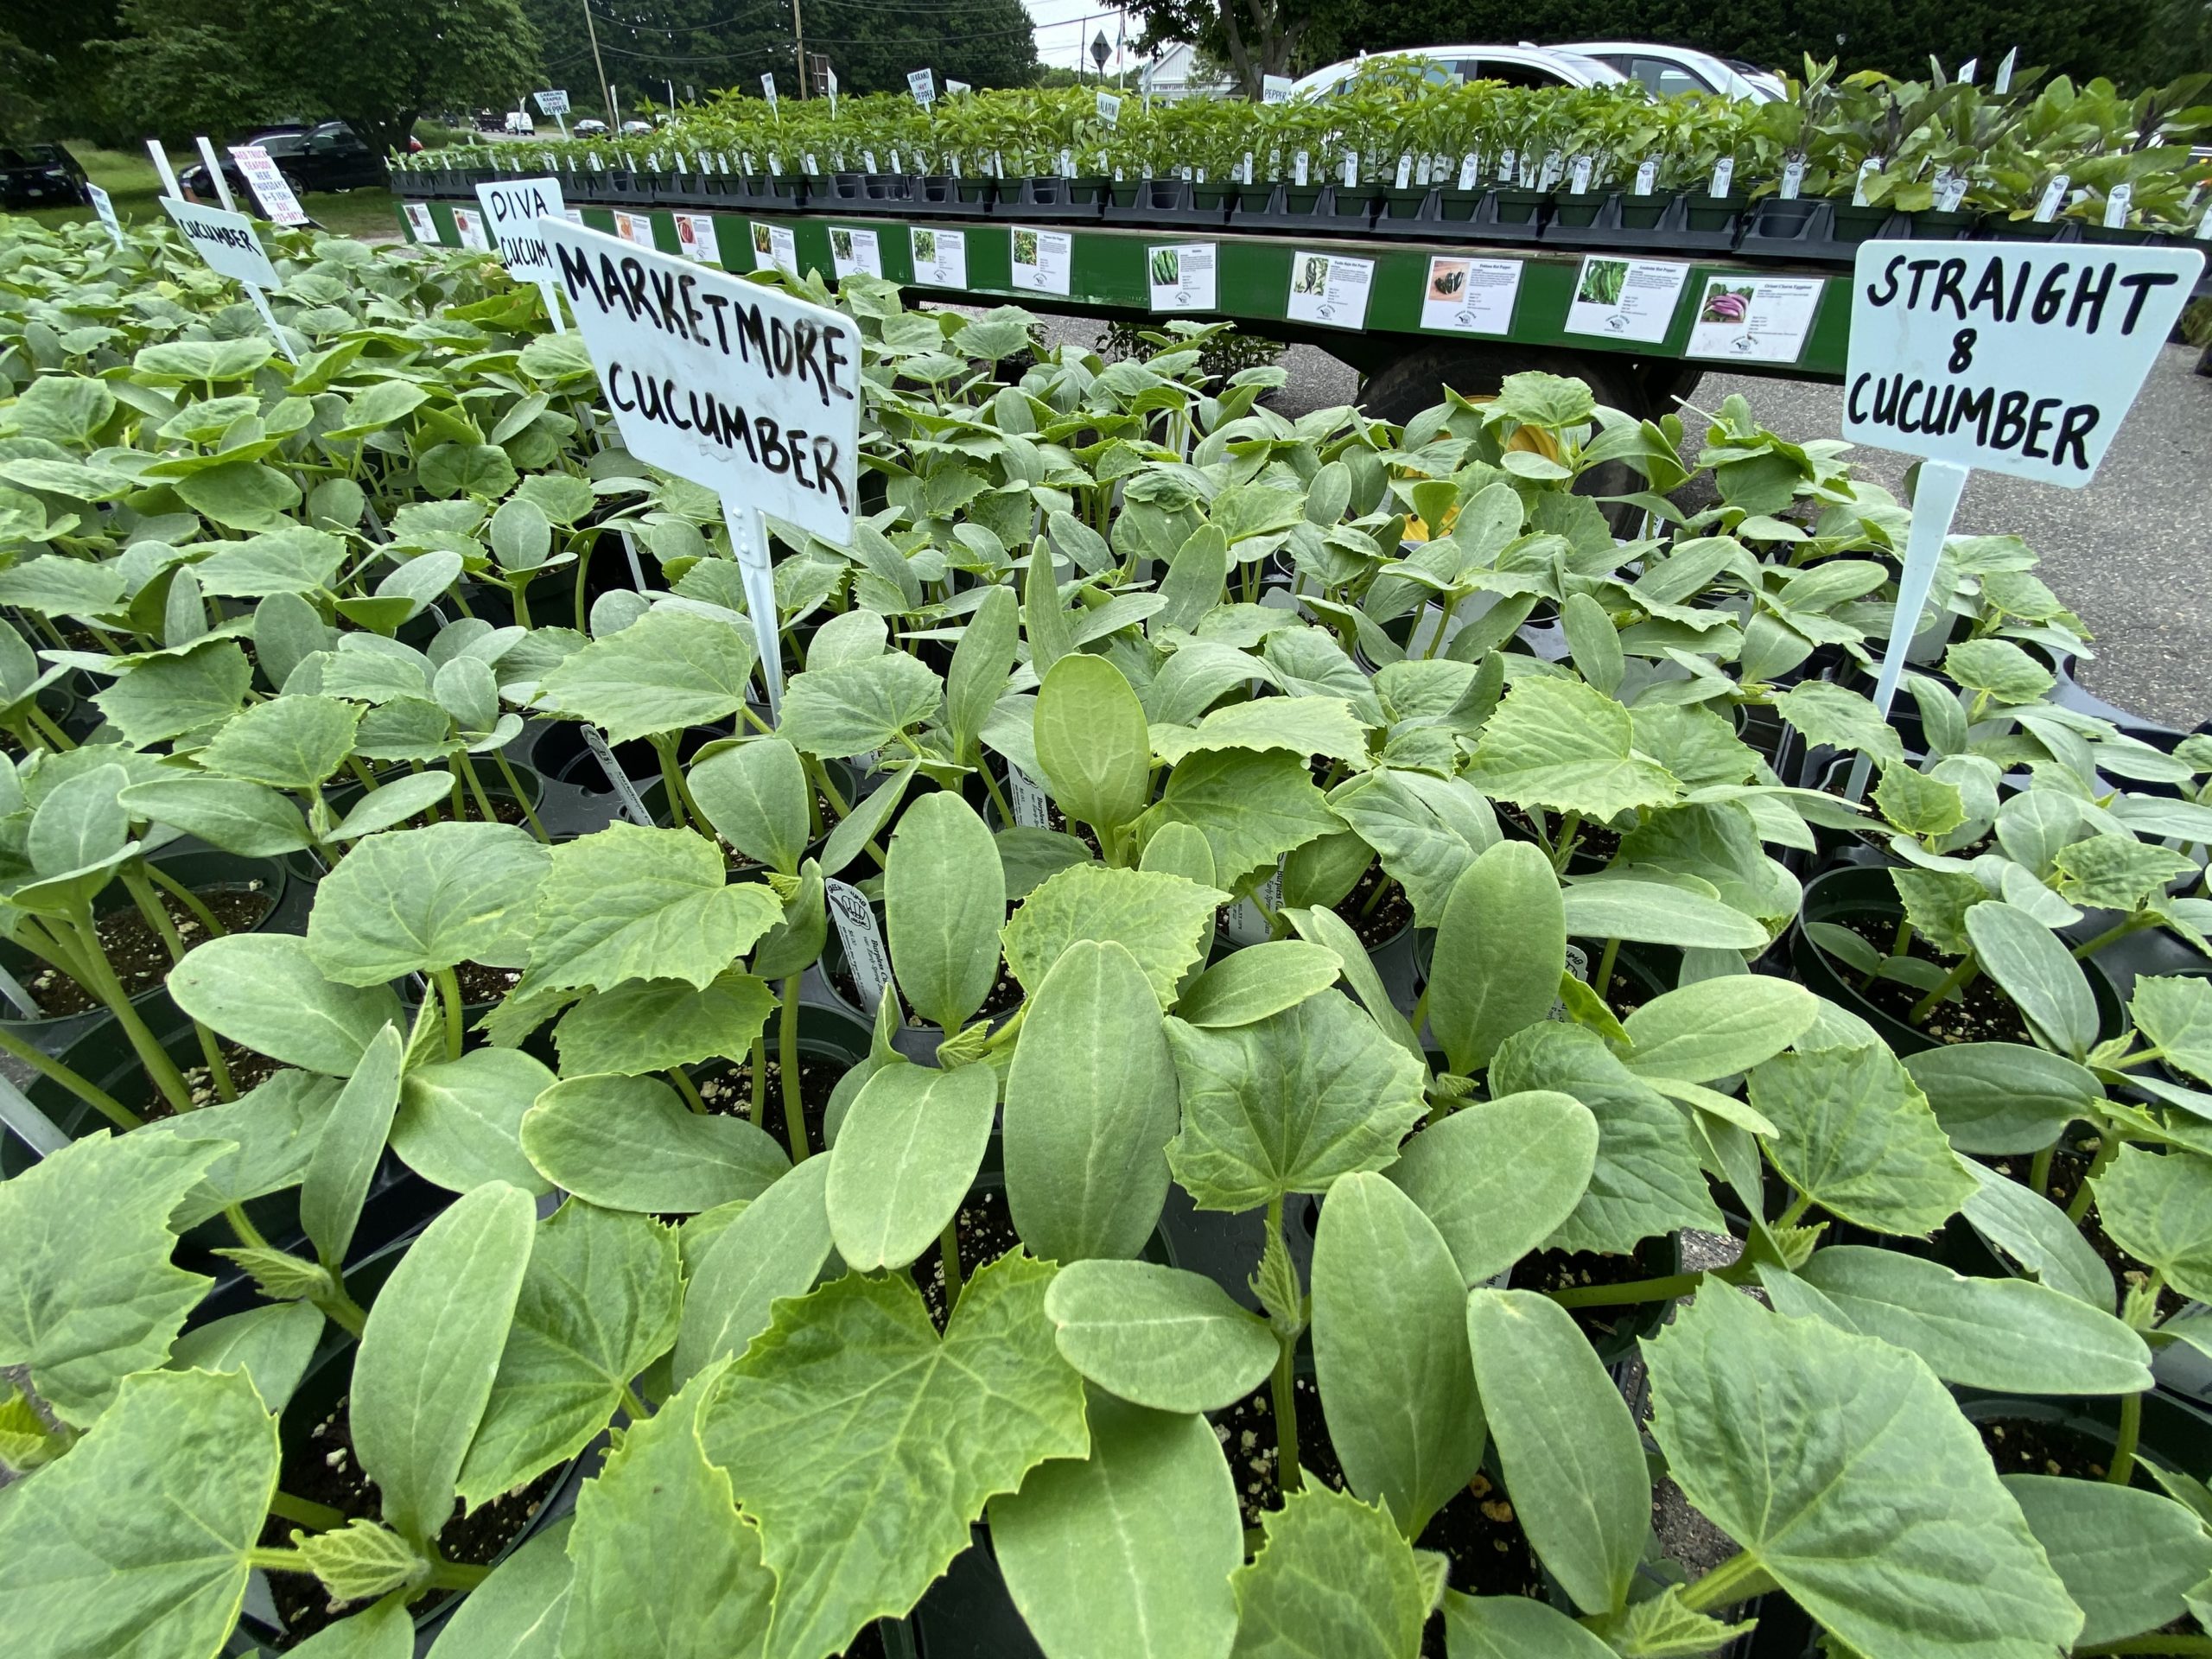 Cucumber plants for sale at the Green Thumb.